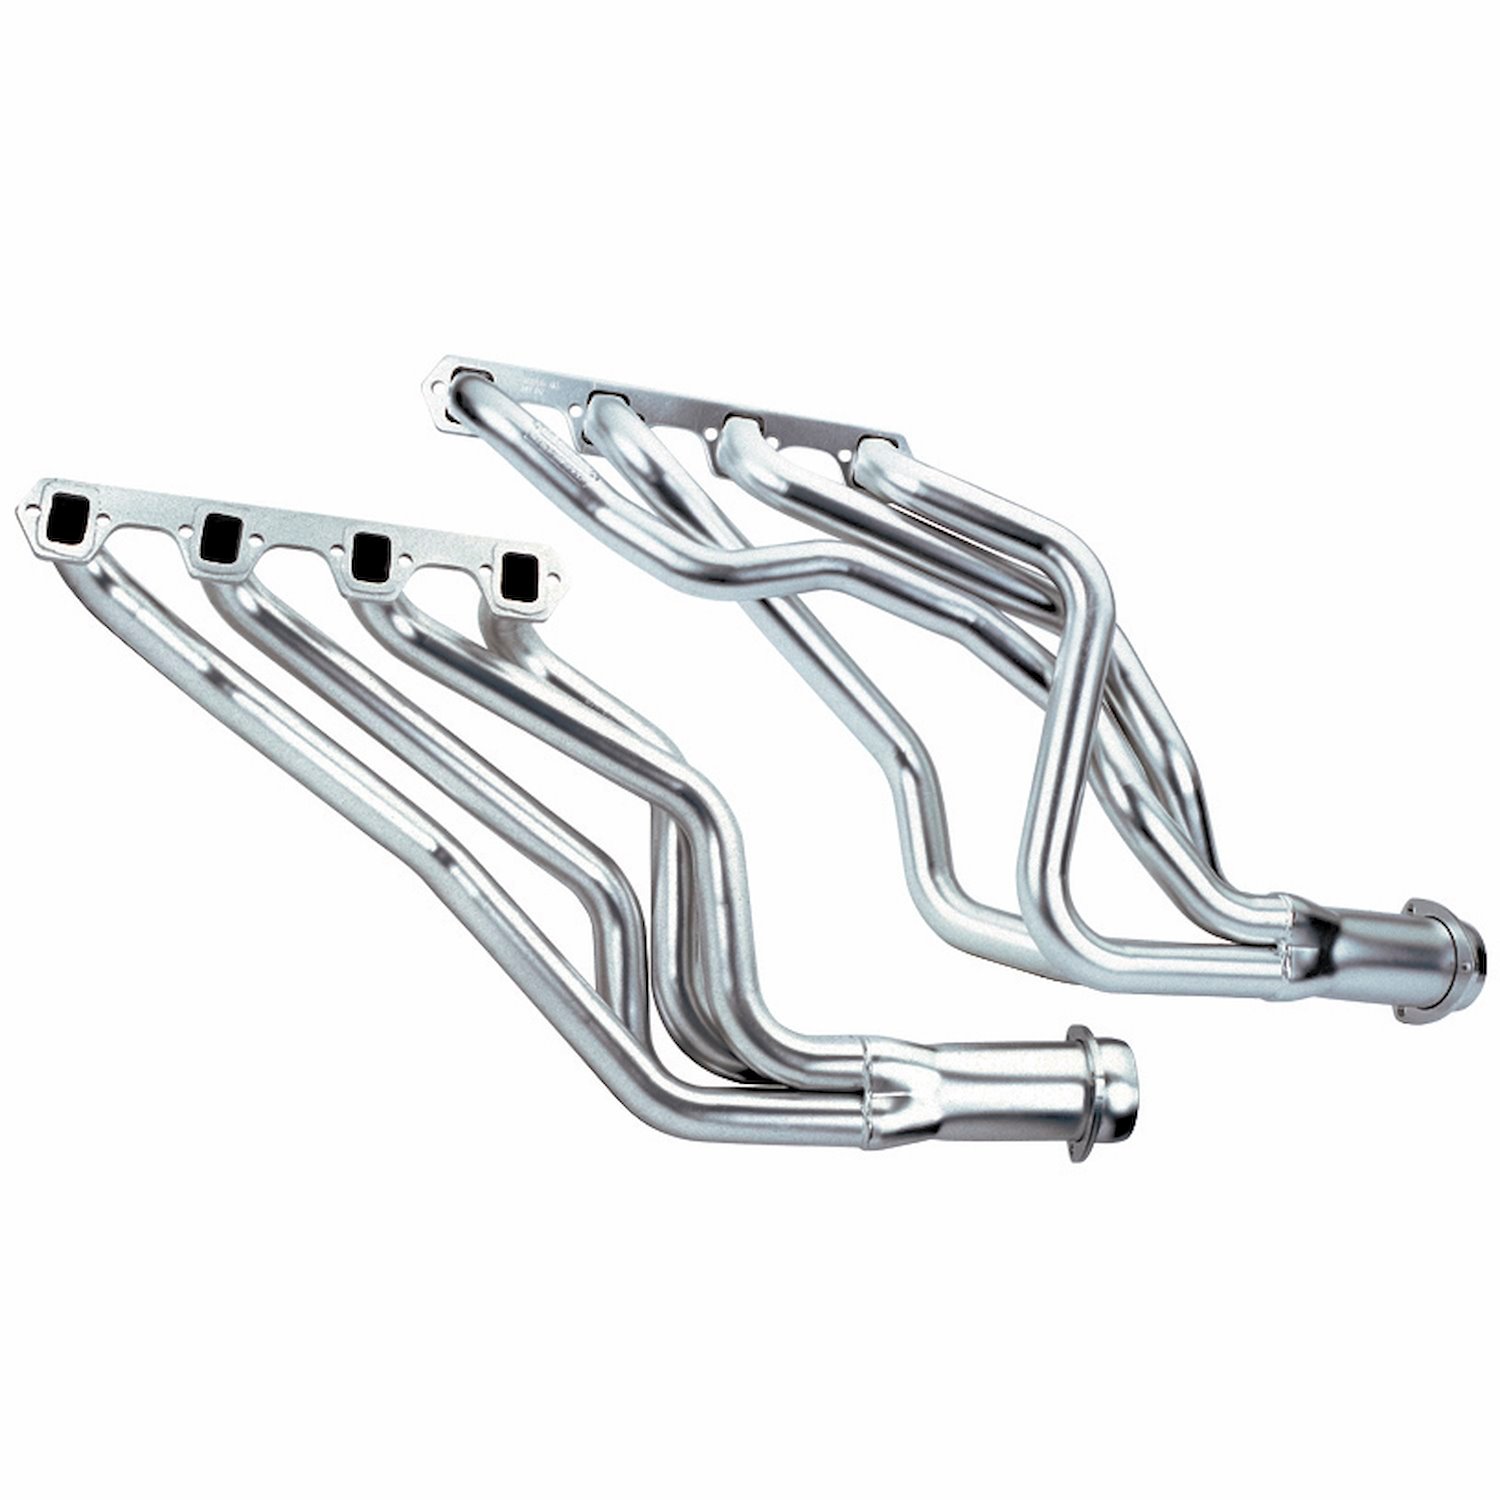 Coated Exhaust Headers 1965-1970 Ford Mustang with Small Block